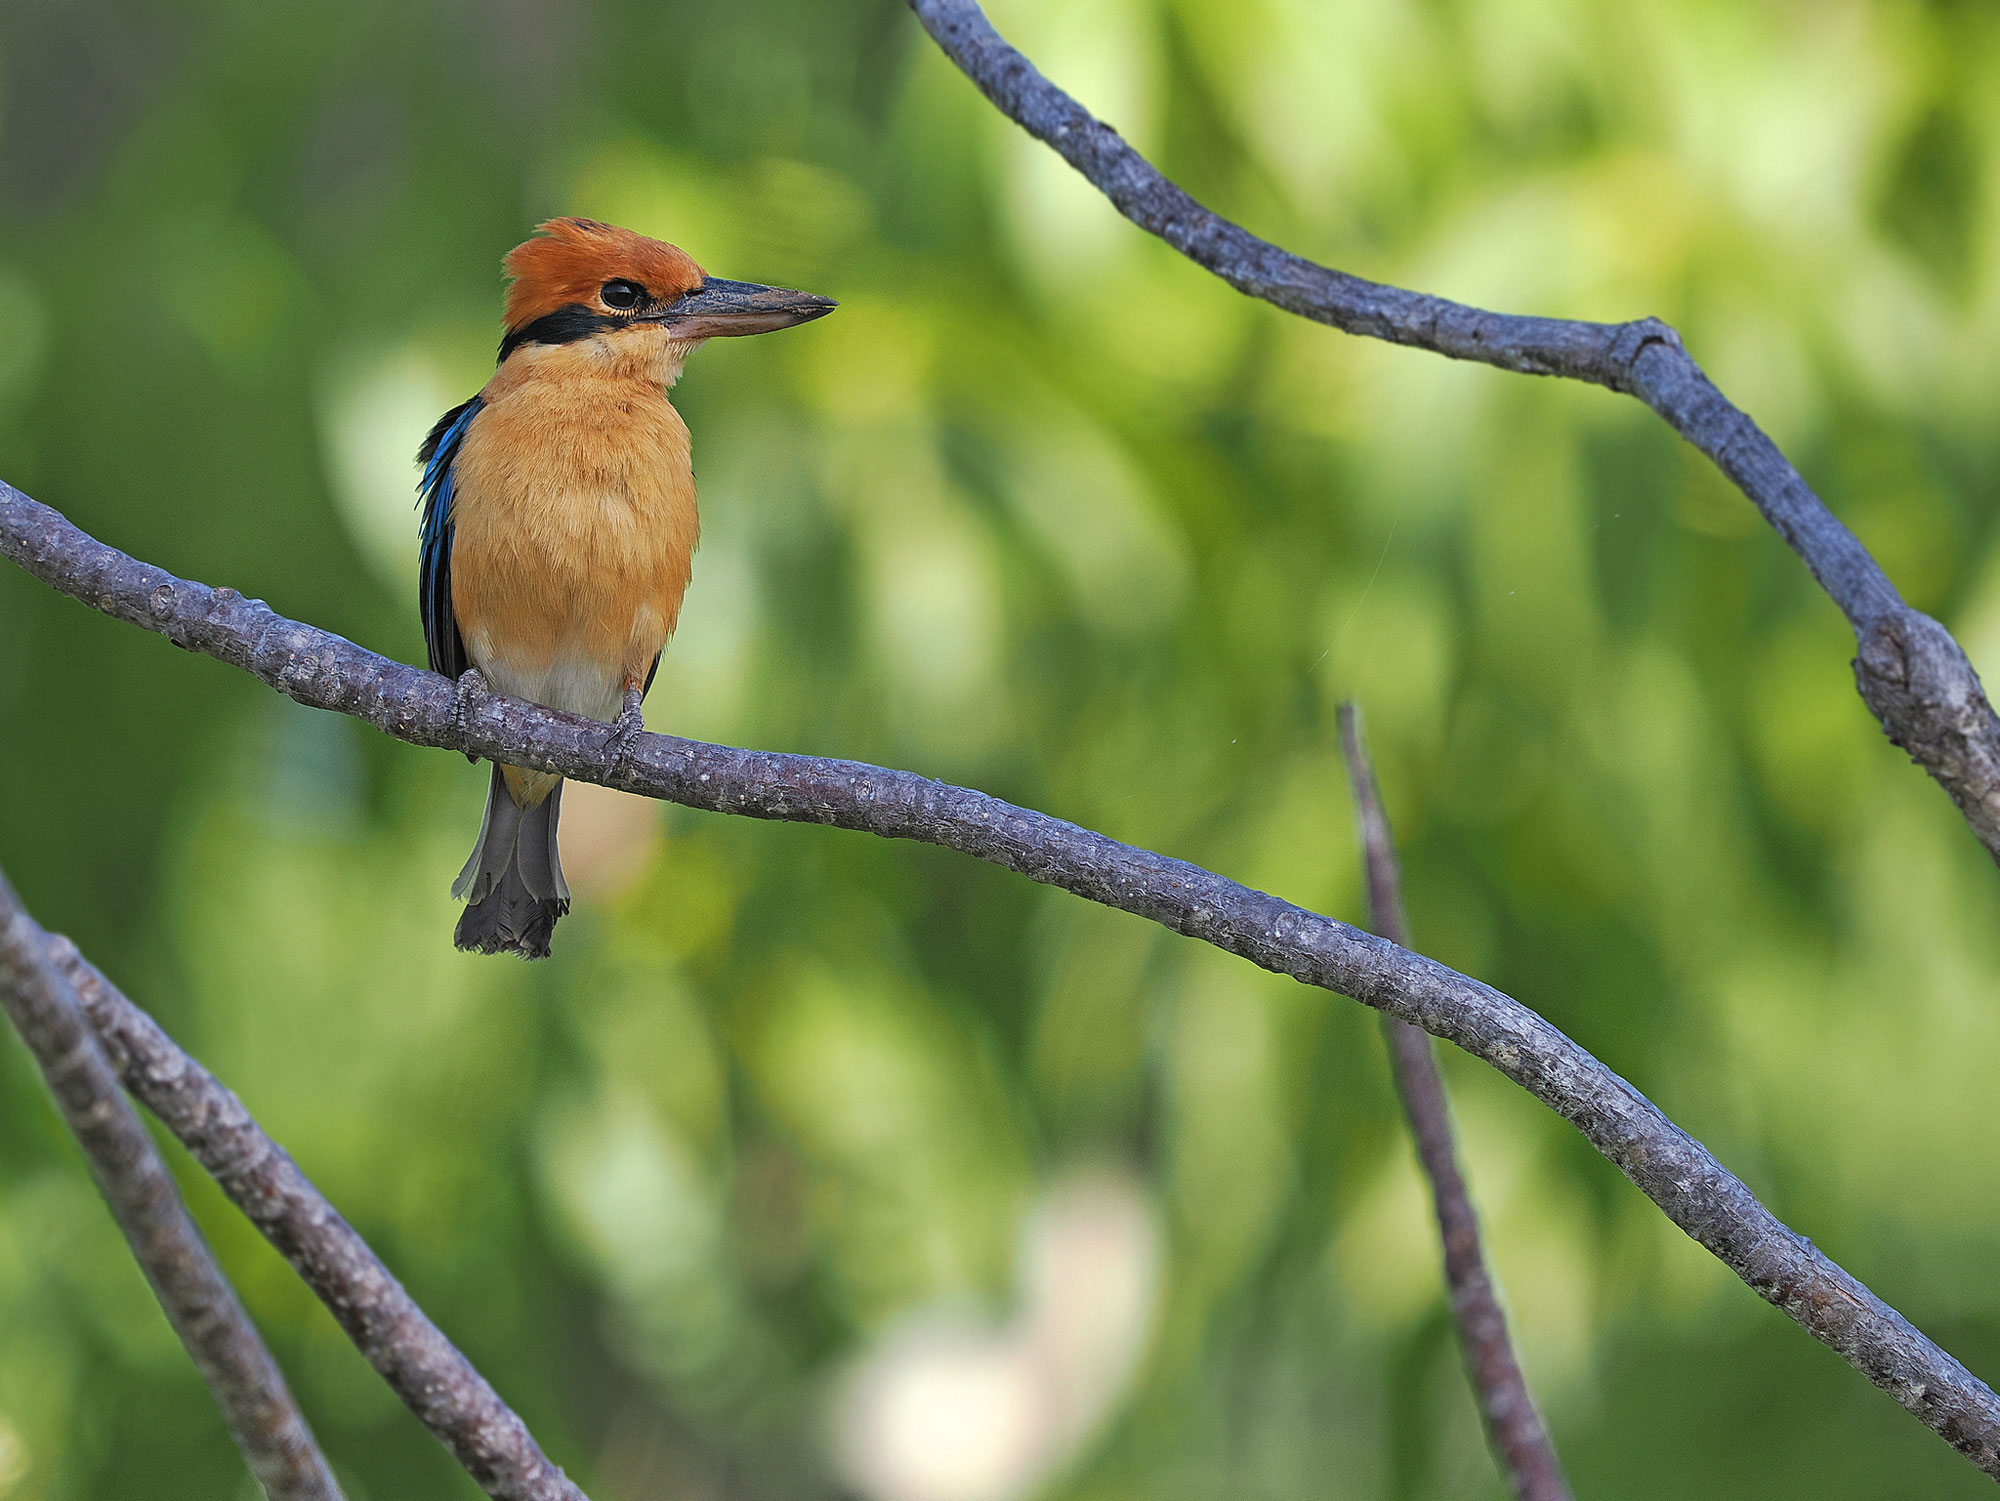 Photograph of a cinnamon-banded kingfisher perched on a thin branch. The photo shows a bird with a dark orange cap, a black stripe on its eye, a light orange breast, and a blue wing.